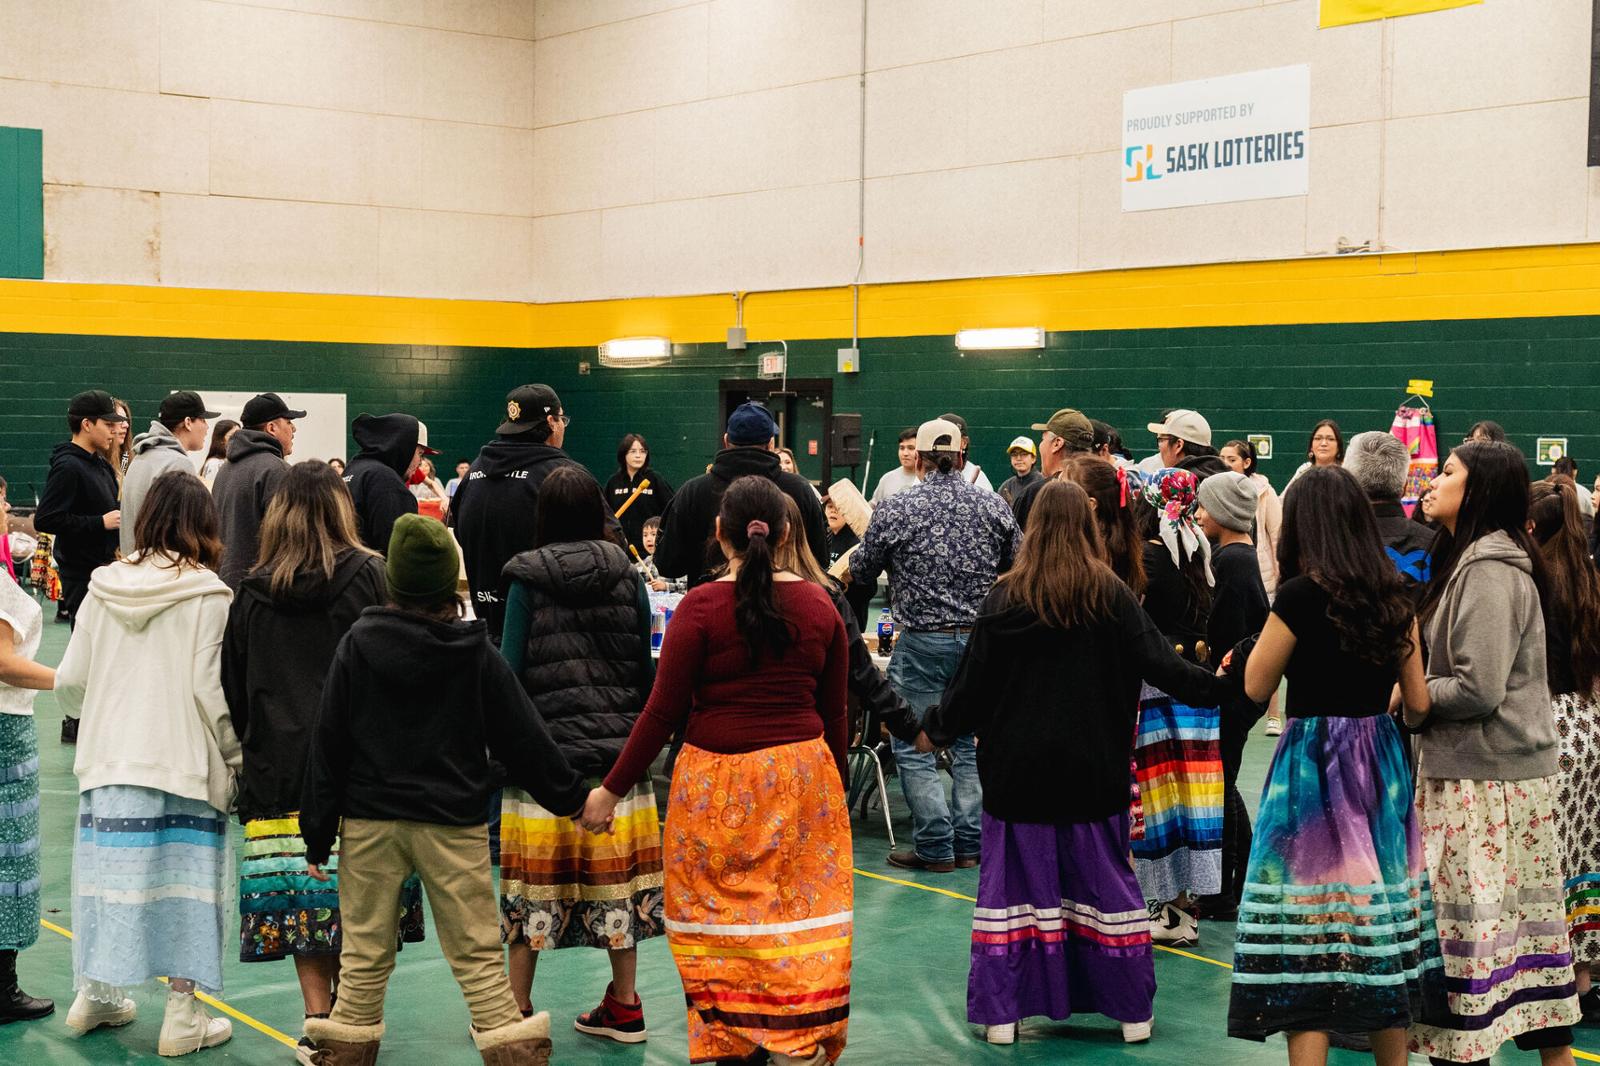 A round dance of people holding hands